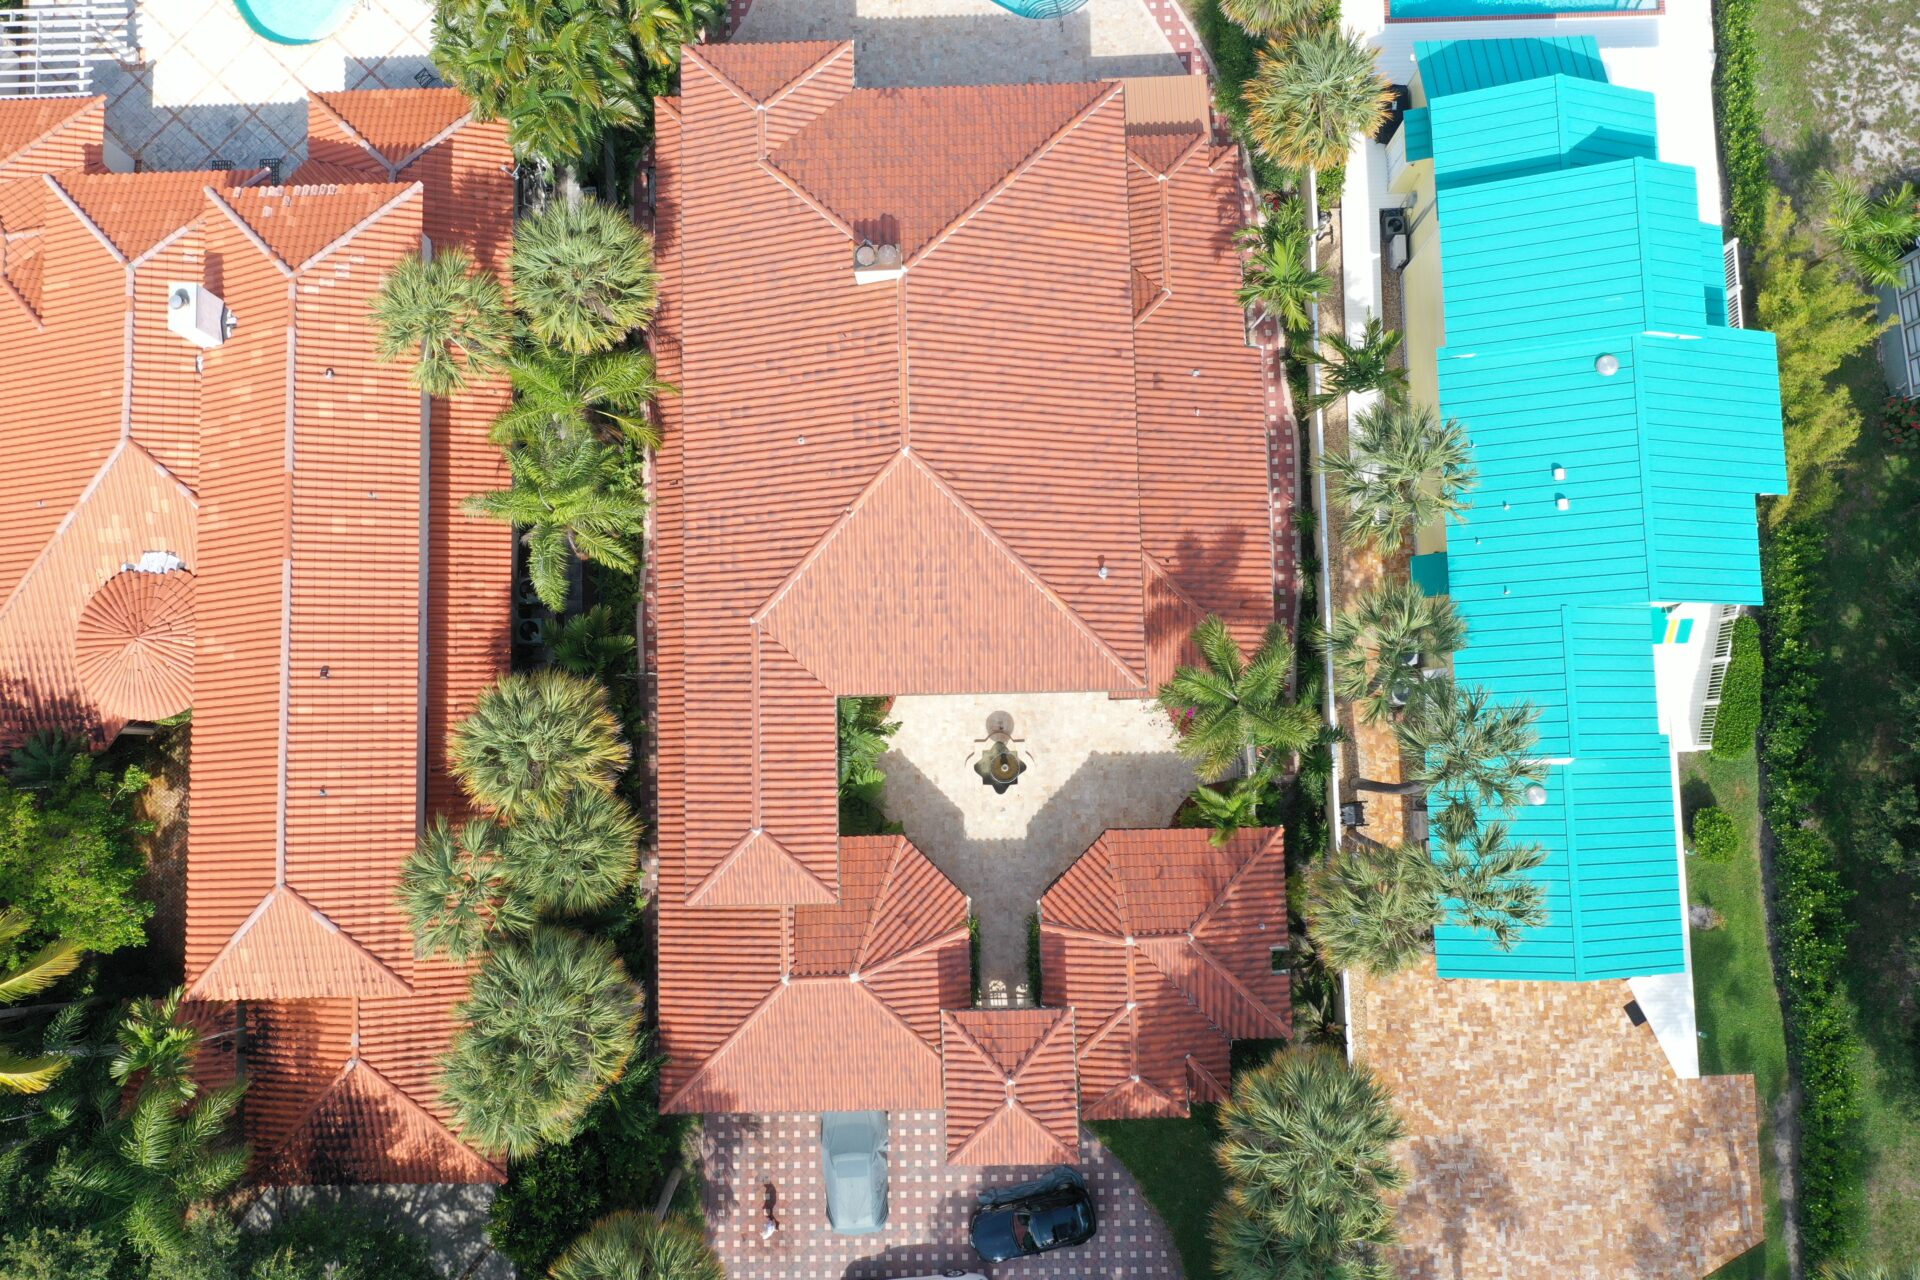 A bird 's eye view of a house with a pool.